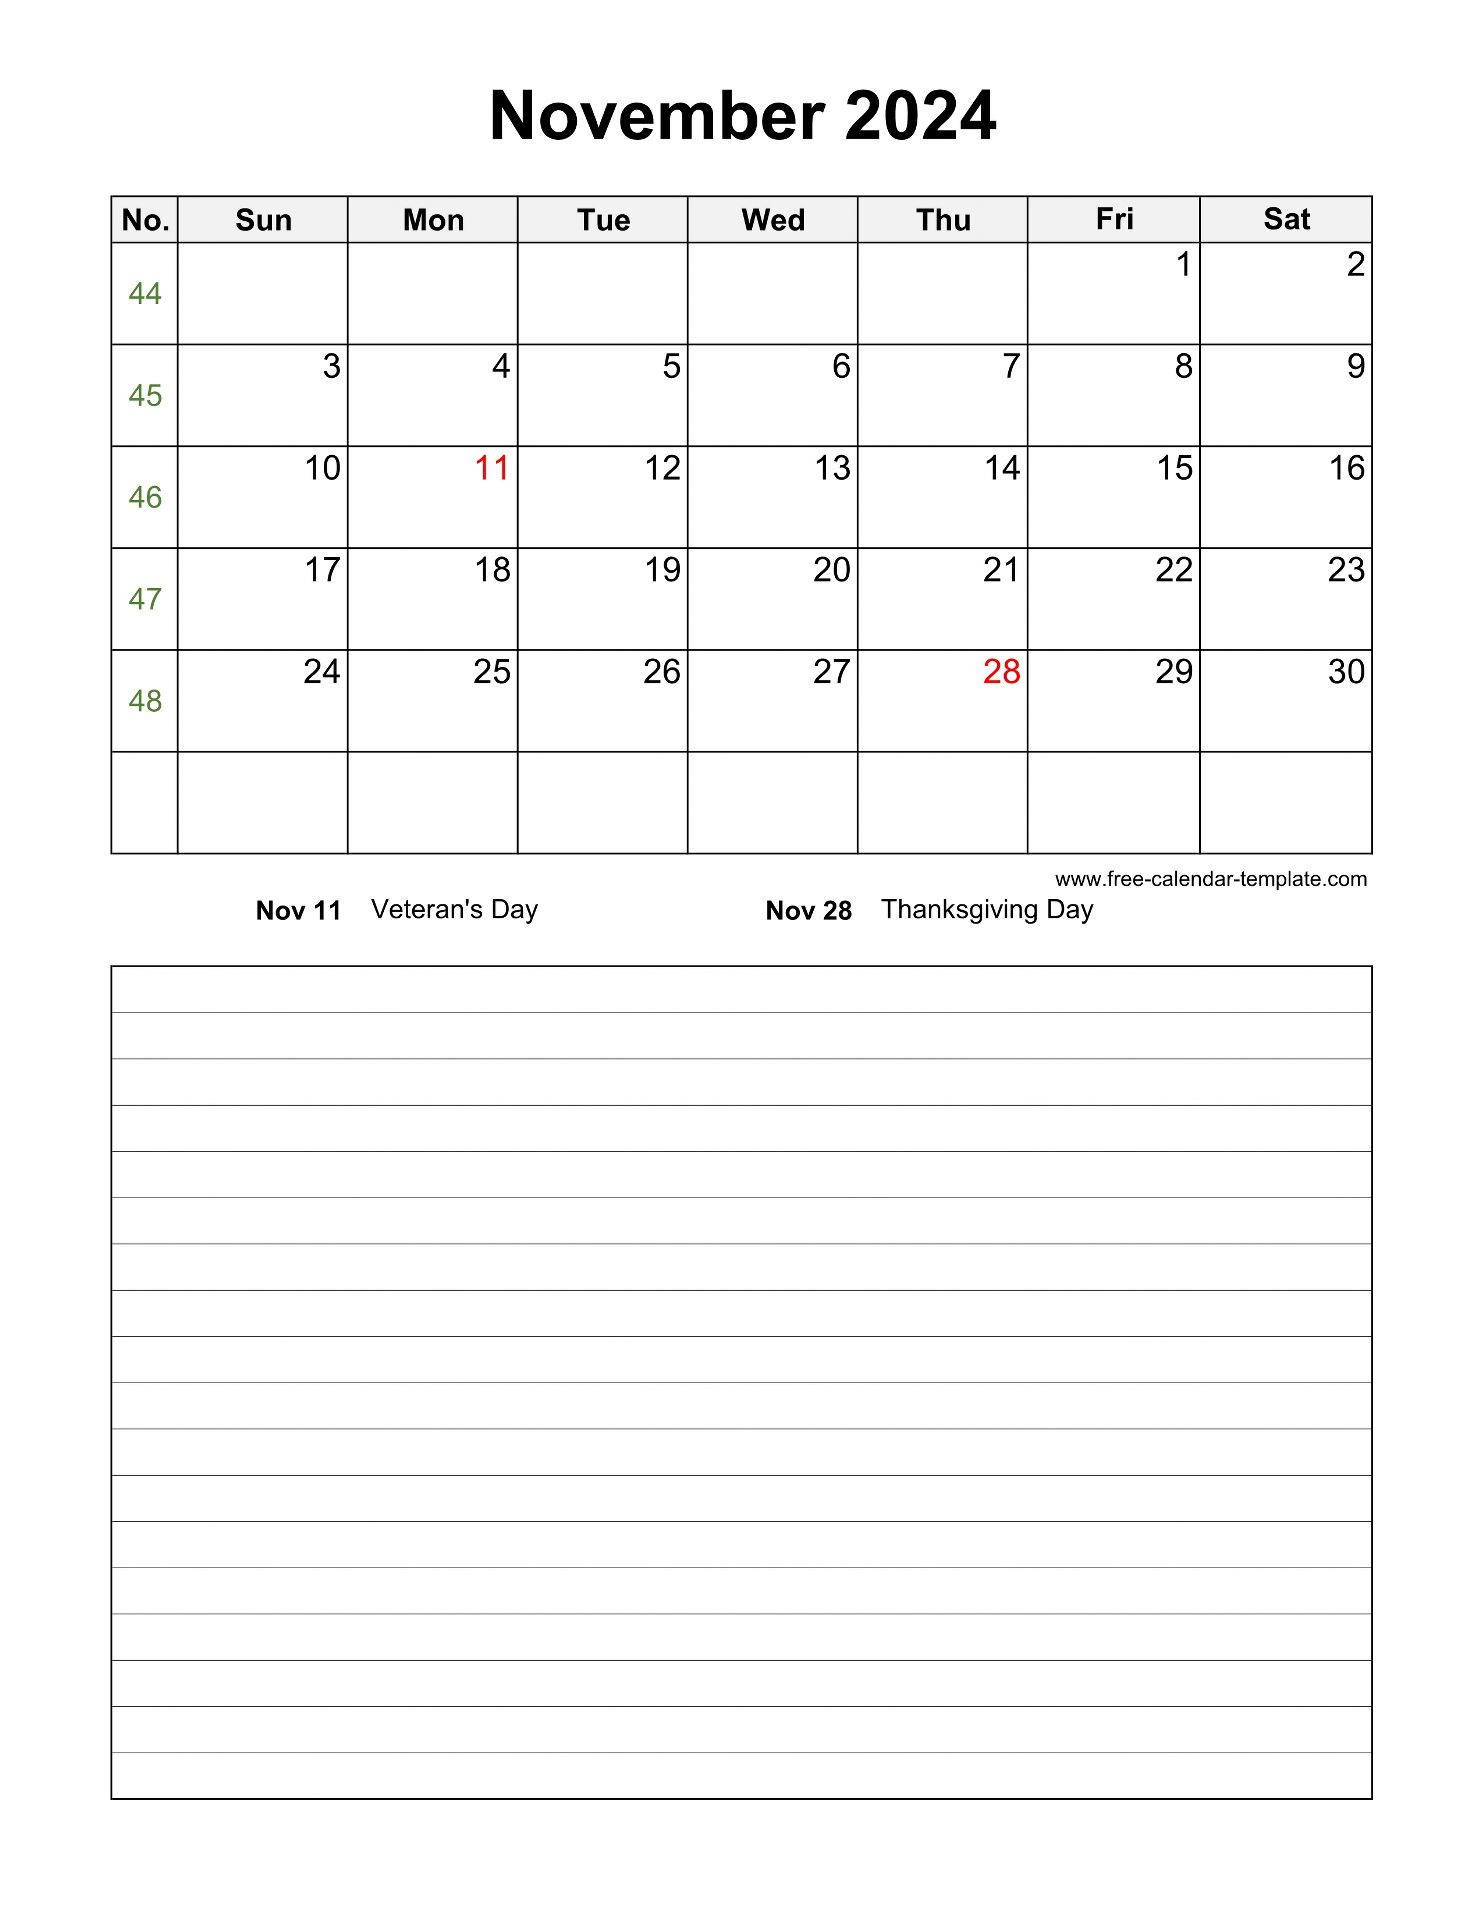 printable-november-2024-calendar-with-space-for-appointments-vertical-free-calendar-template